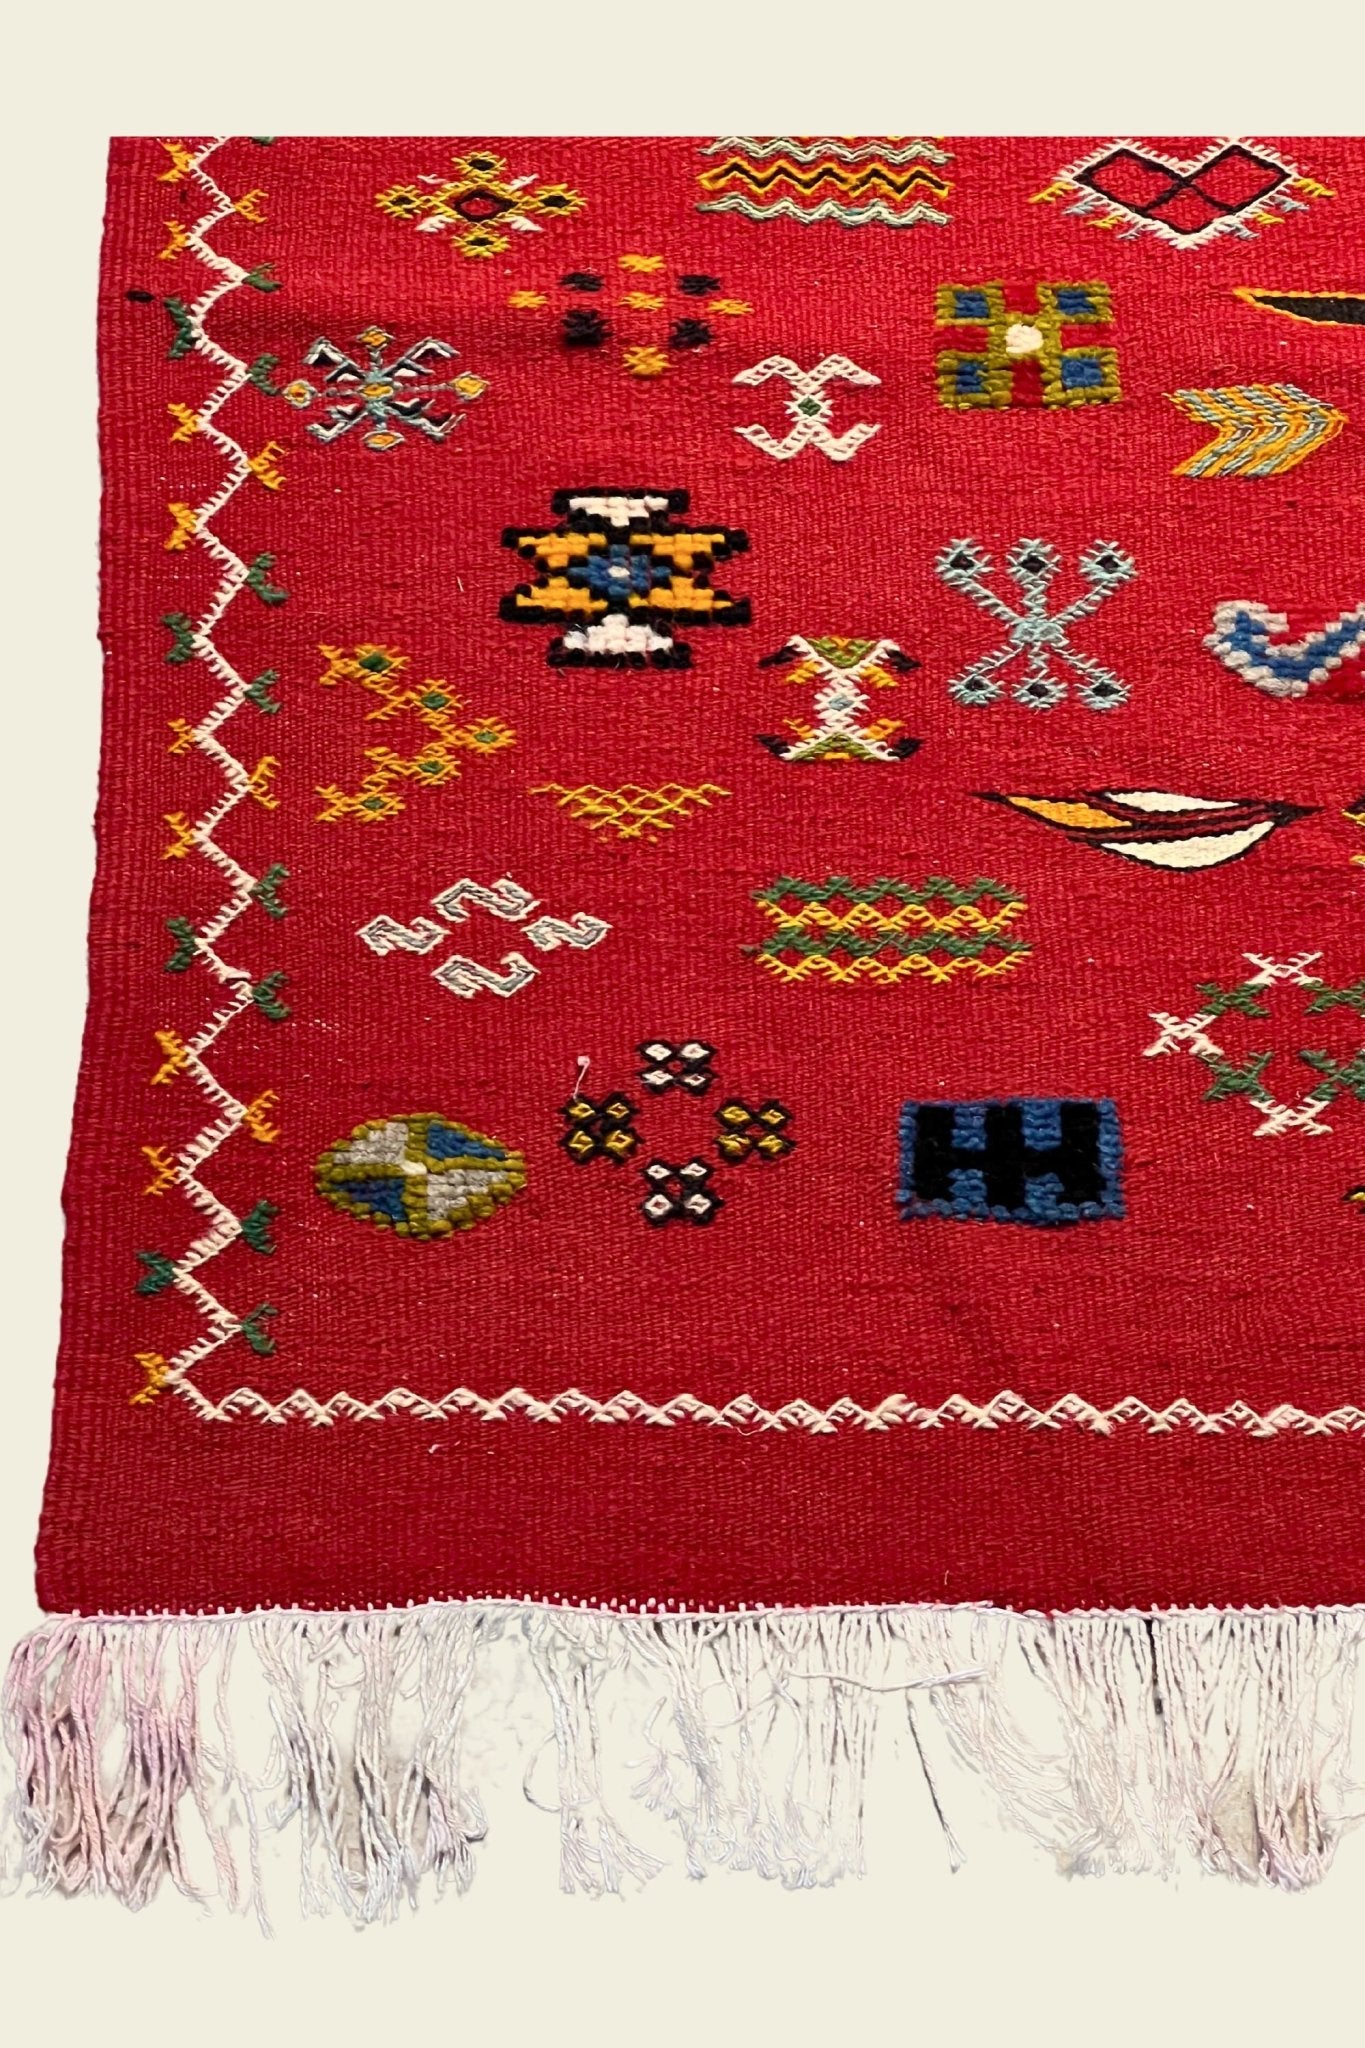 Vintage Moroccan area rug from Akhnif, Wool and Thread, 4'11" x 8'0" or 149 cm x 245 cm - Dar Bouchaib Marrakech